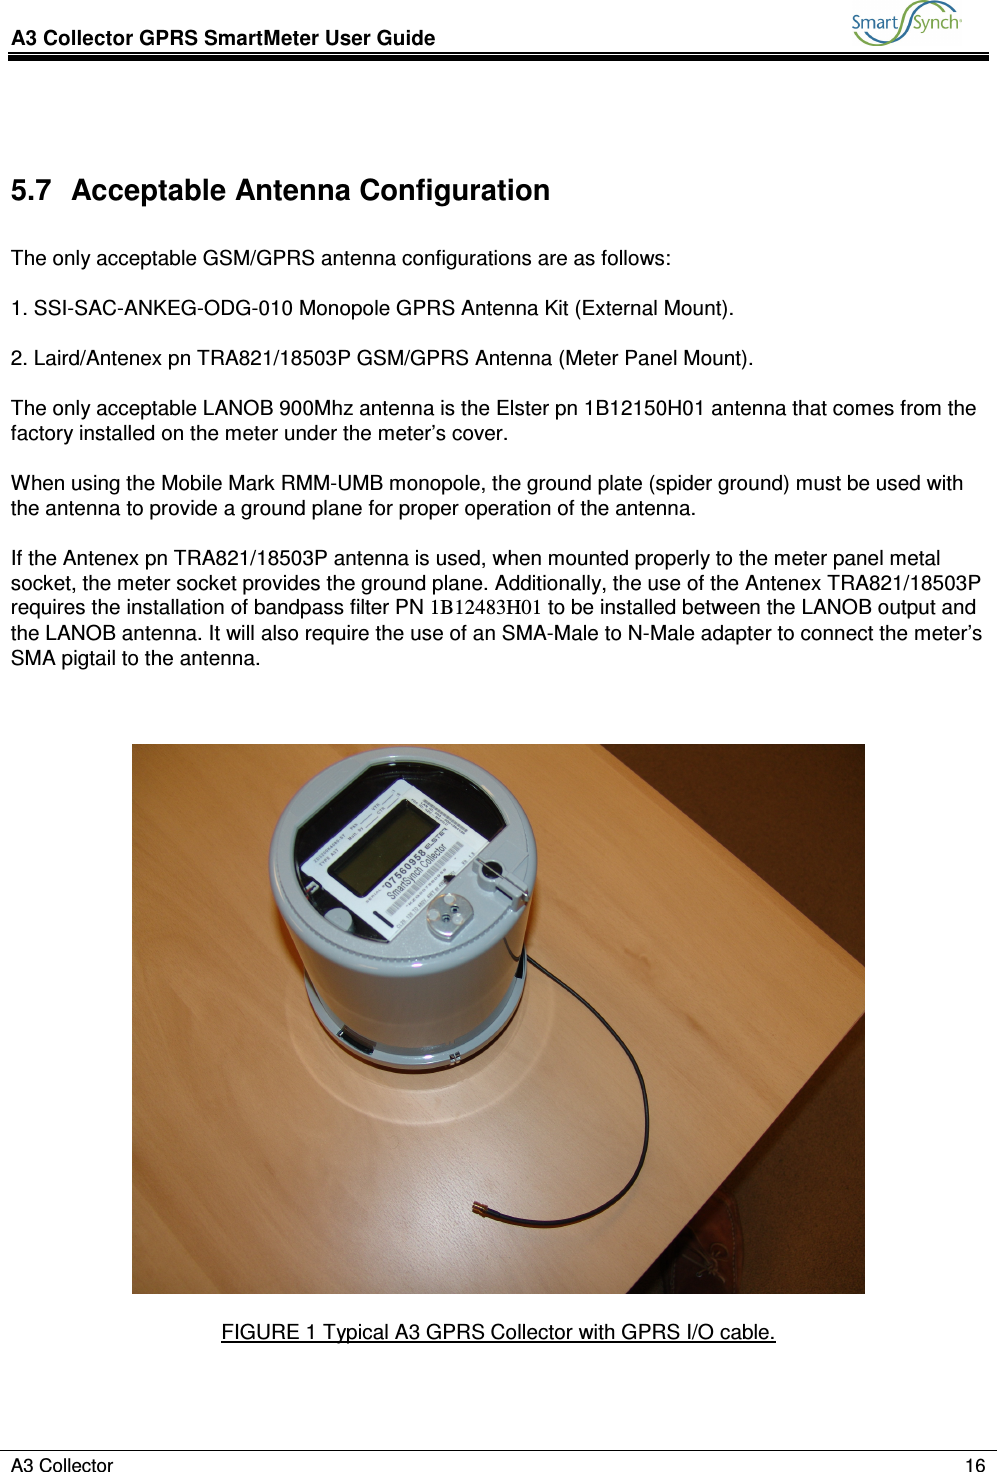 A3 Collector GPRS SmartMeter User Guide           A3 Collector    16   5.7  Acceptable Antenna Configuration  The only acceptable GSM/GPRS antenna configurations are as follows:  1. SSI-SAC-ANKEG-ODG-010 Monopole GPRS Antenna Kit (External Mount).  2. Laird/Antenex pn TRA821/18503P GSM/GPRS Antenna (Meter Panel Mount).  The only acceptable LANOB 900Mhz antenna is the Elster pn 1B12150H01 antenna that comes from the factory installed on the meter under the meter’s cover.  When using the Mobile Mark RMM-UMB monopole, the ground plate (spider ground) must be used with the antenna to provide a ground plane for proper operation of the antenna.  If the Antenex pn TRA821/18503P antenna is used, when mounted properly to the meter panel metal socket, the meter socket provides the ground plane. Additionally, the use of the Antenex TRA821/18503P requires the installation of bandpass filter PN 1B12483H01 to be installed between the LANOB output and the LANOB antenna. It will also require the use of an SMA-Male to N-Male adapter to connect the meter’s SMA pigtail to the antenna.      FIGURE 1 Typical A3 GPRS Collector with GPRS I/O cable.    